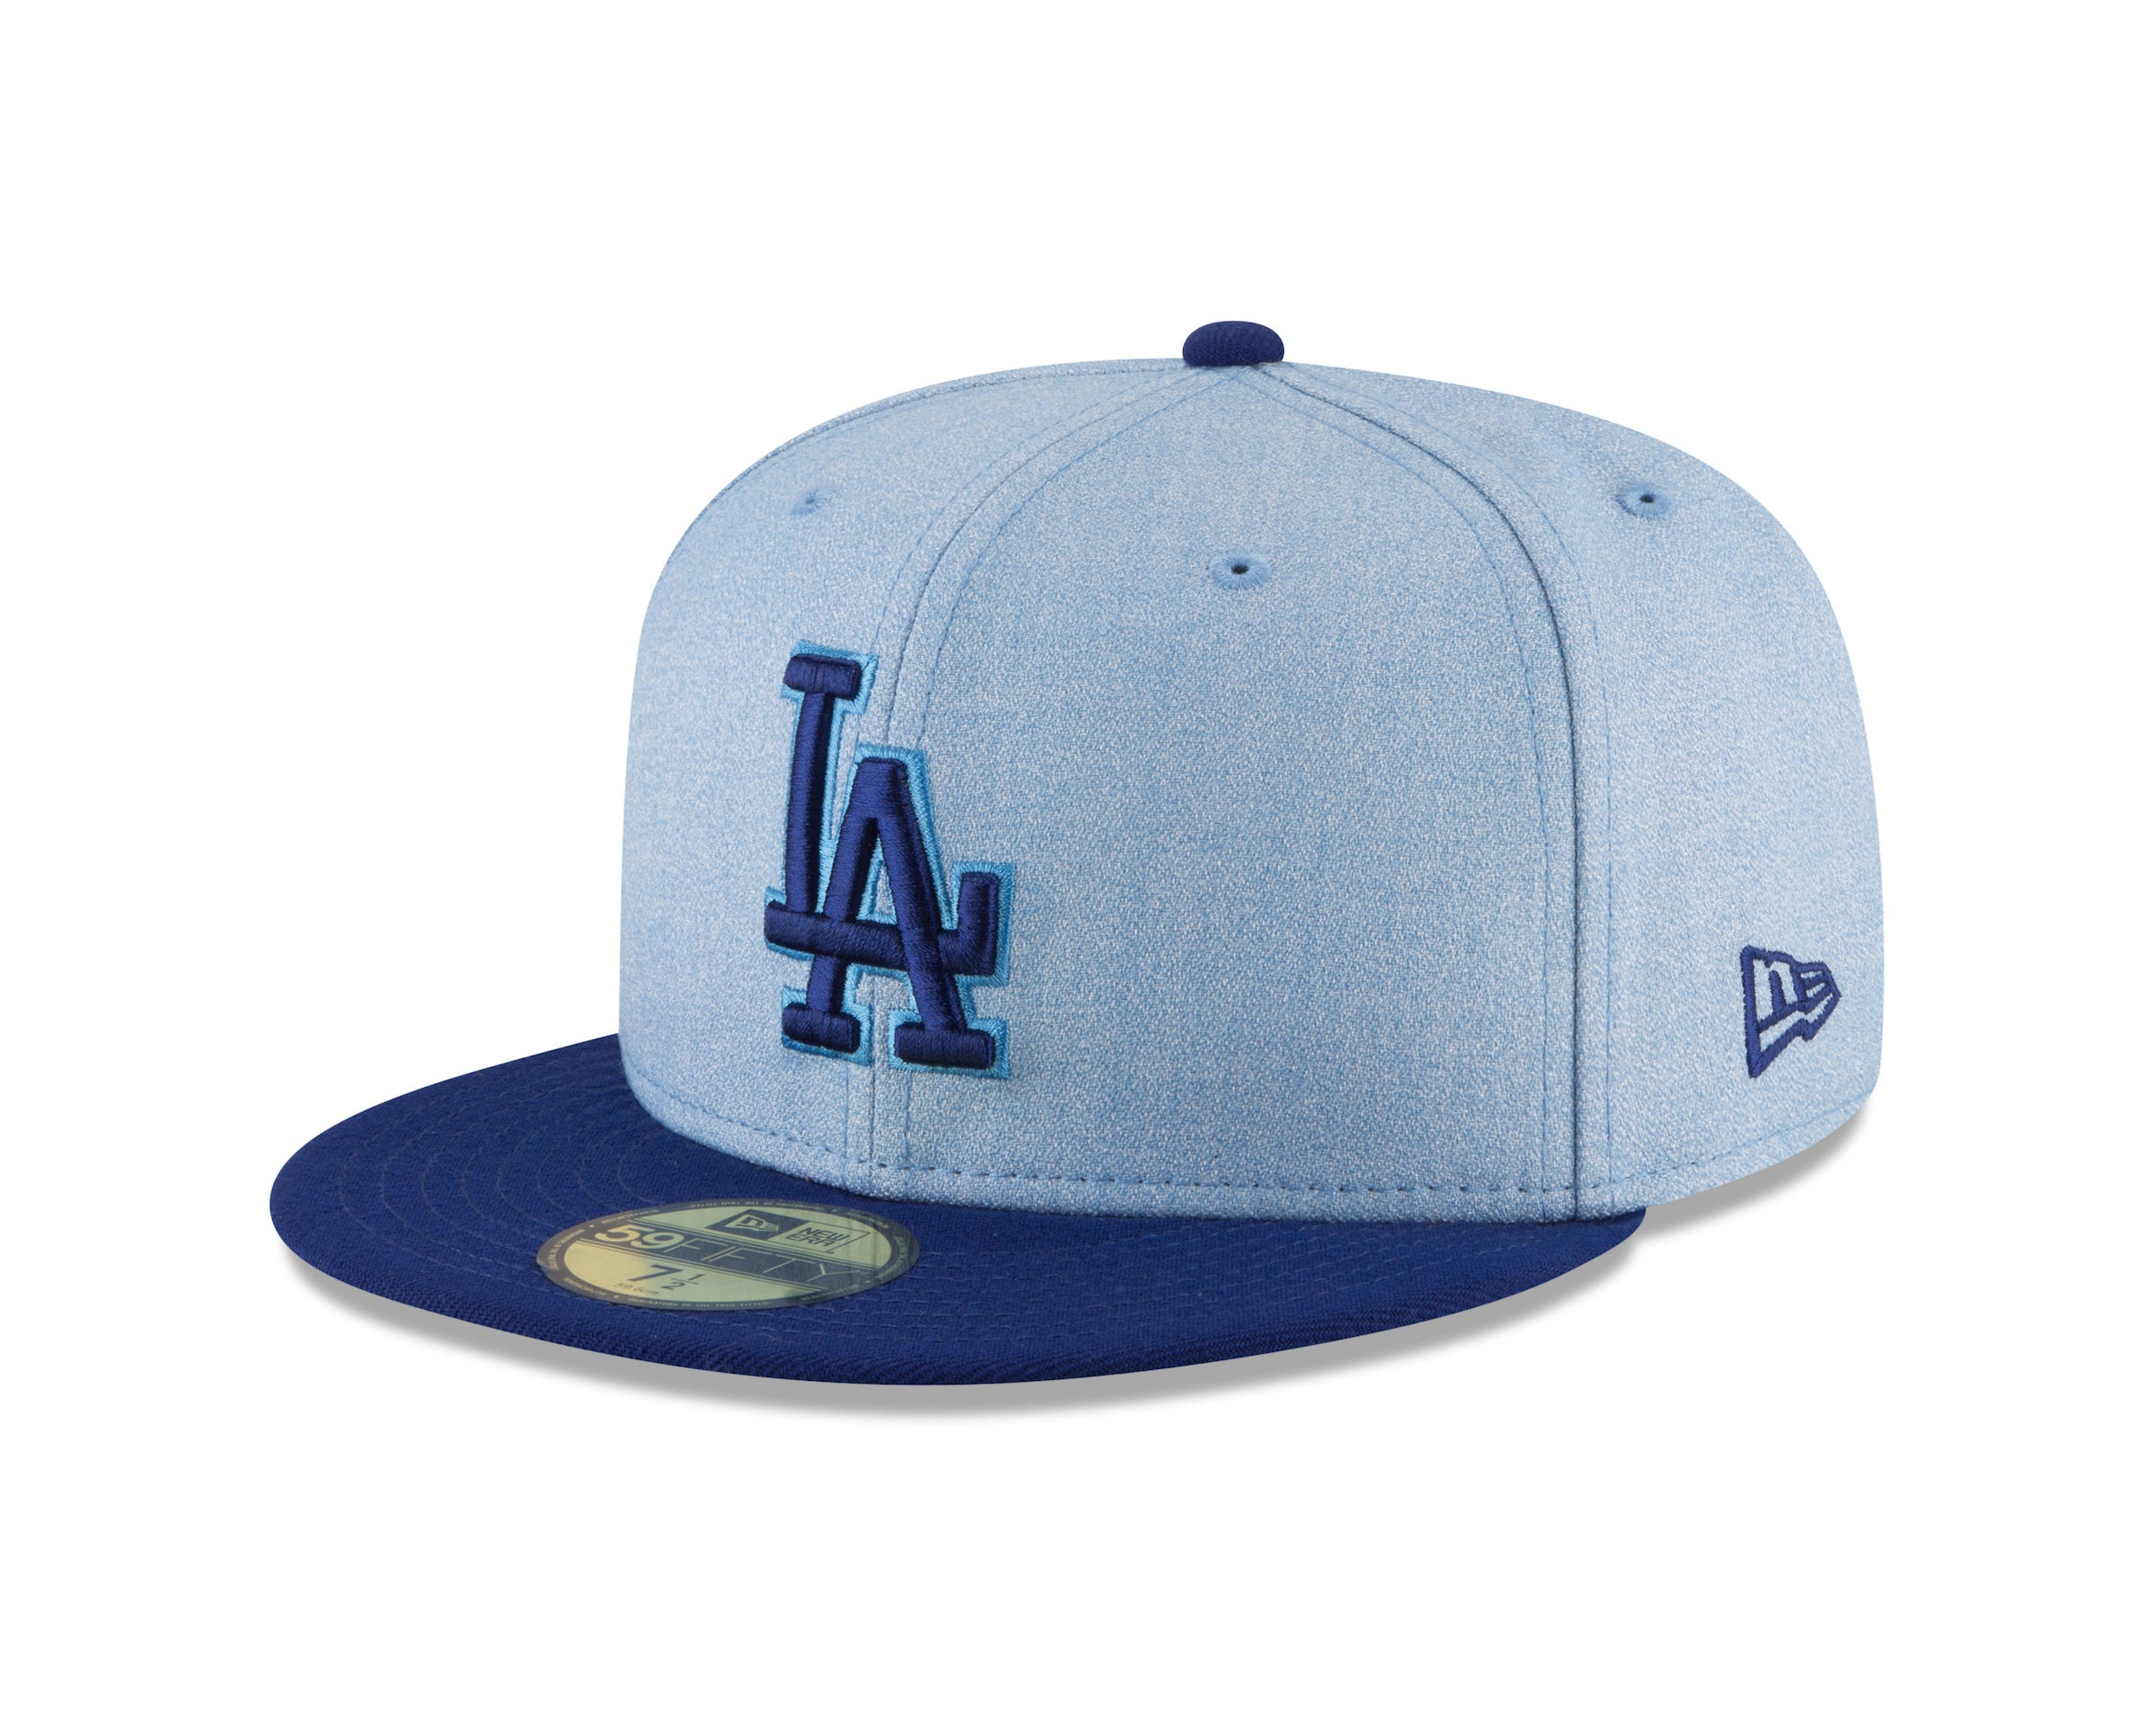 Dodgers will wear these caps and jerseys for MLB special event days in 2017  - True Blue LA